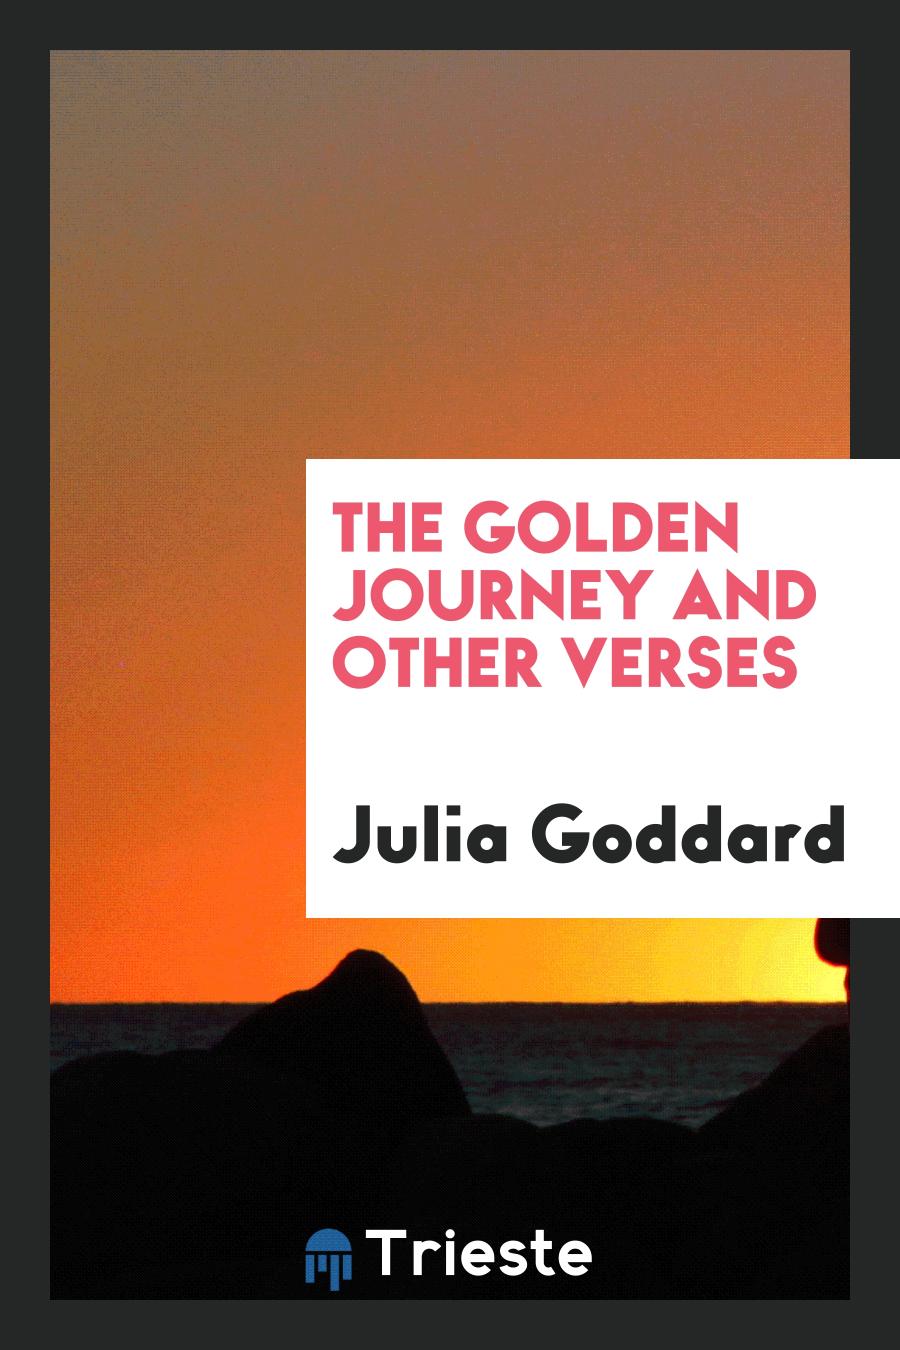 The Golden Journey and Other Verses